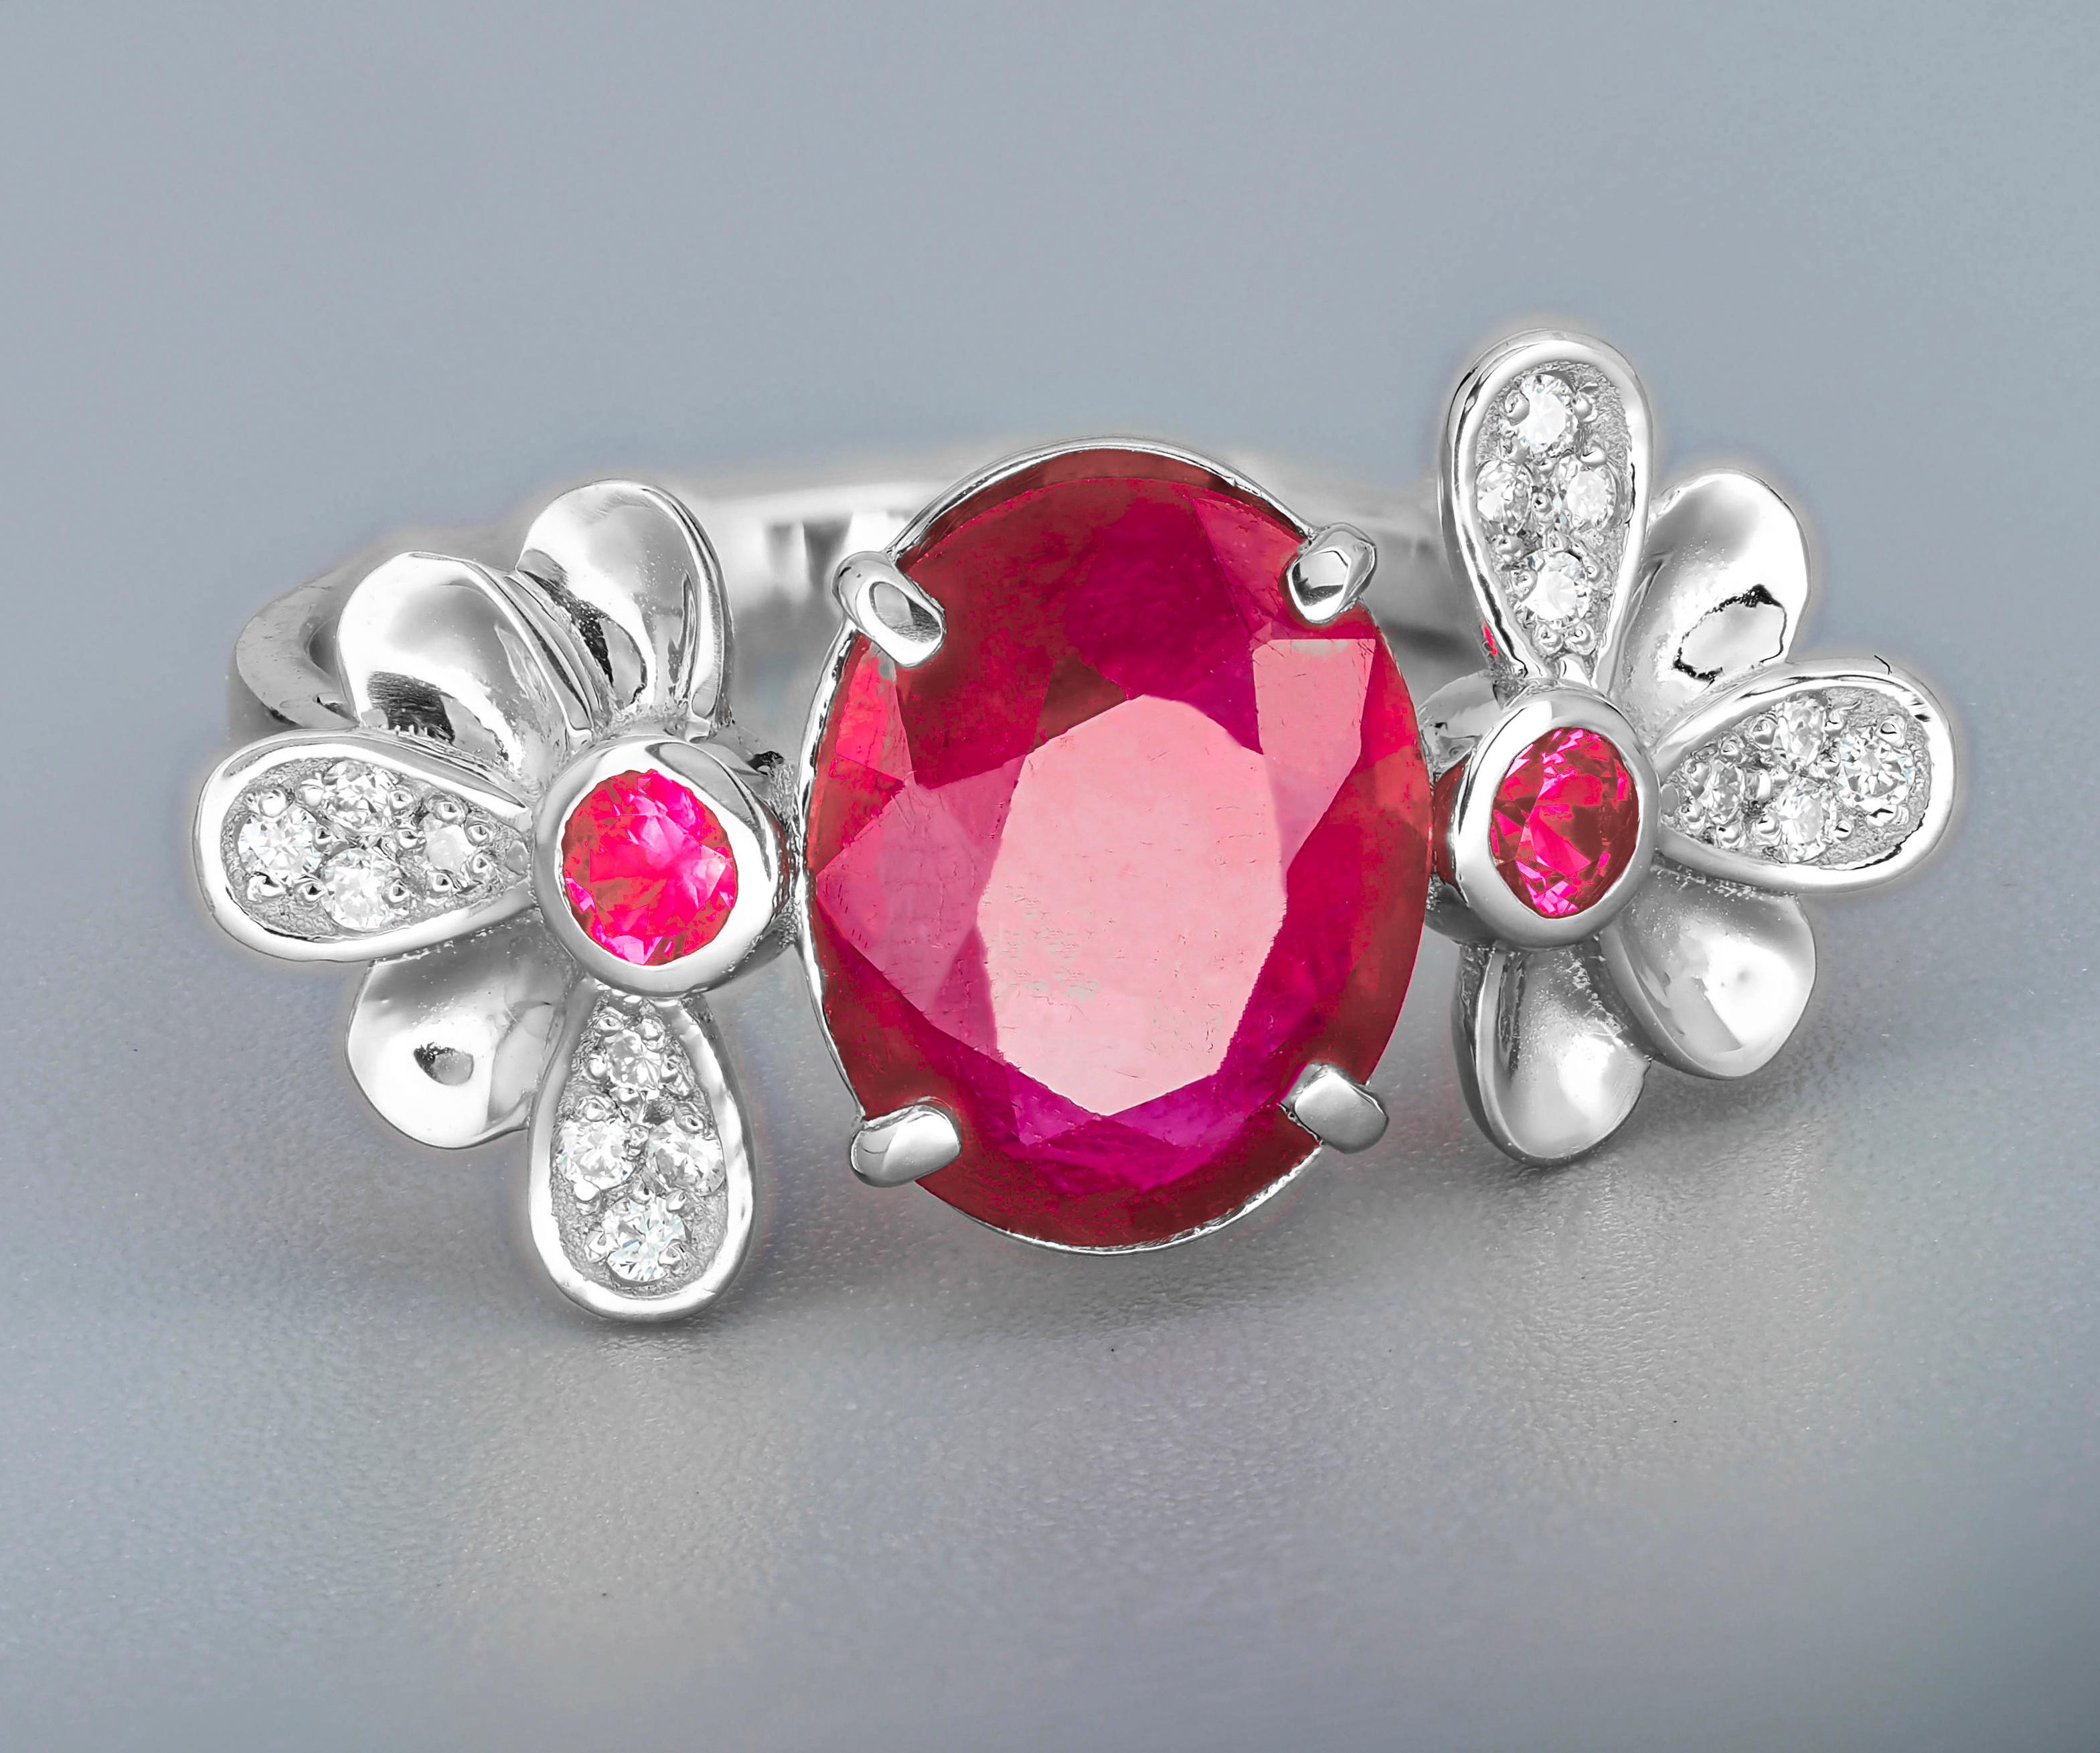 Women's Genuine Ruby Ring, Ruby and Diamonds Ring